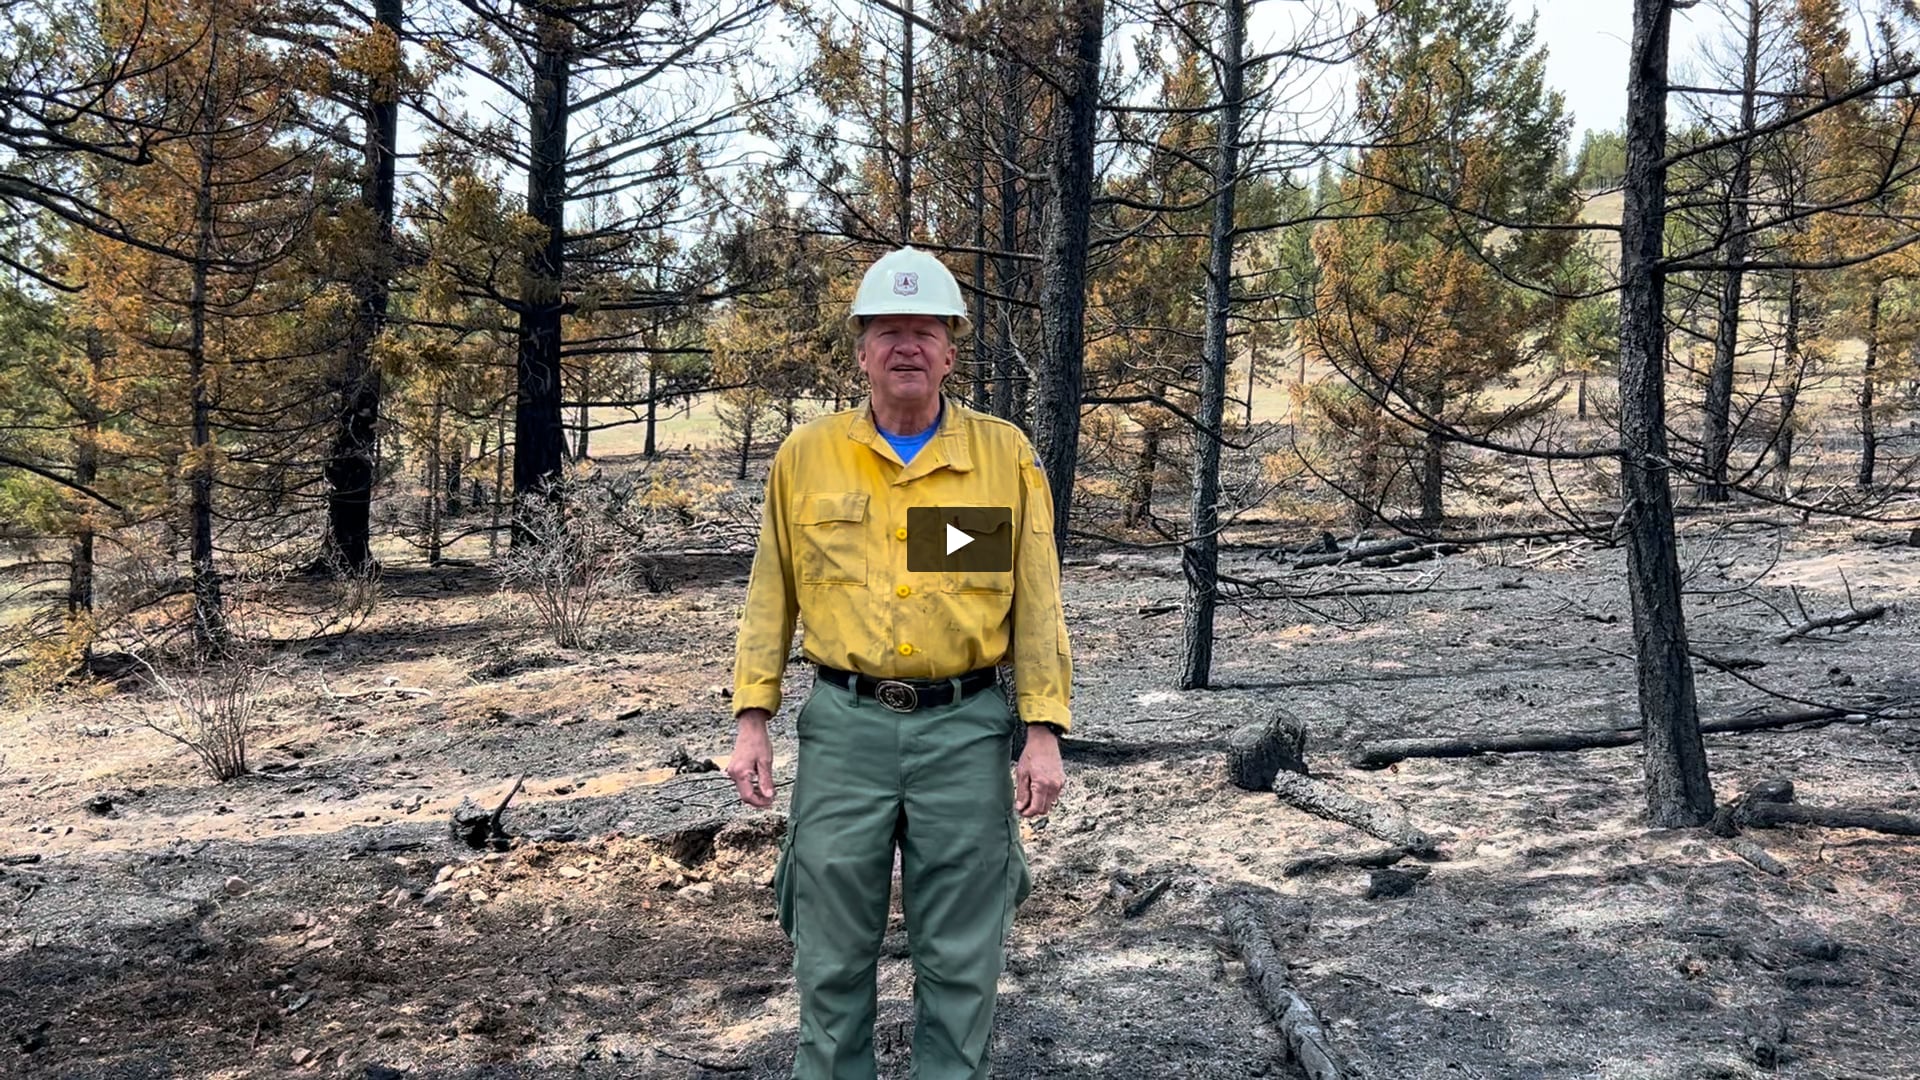 This video contains a brief informational update about smoke during the Forsythe II prescribed burn.